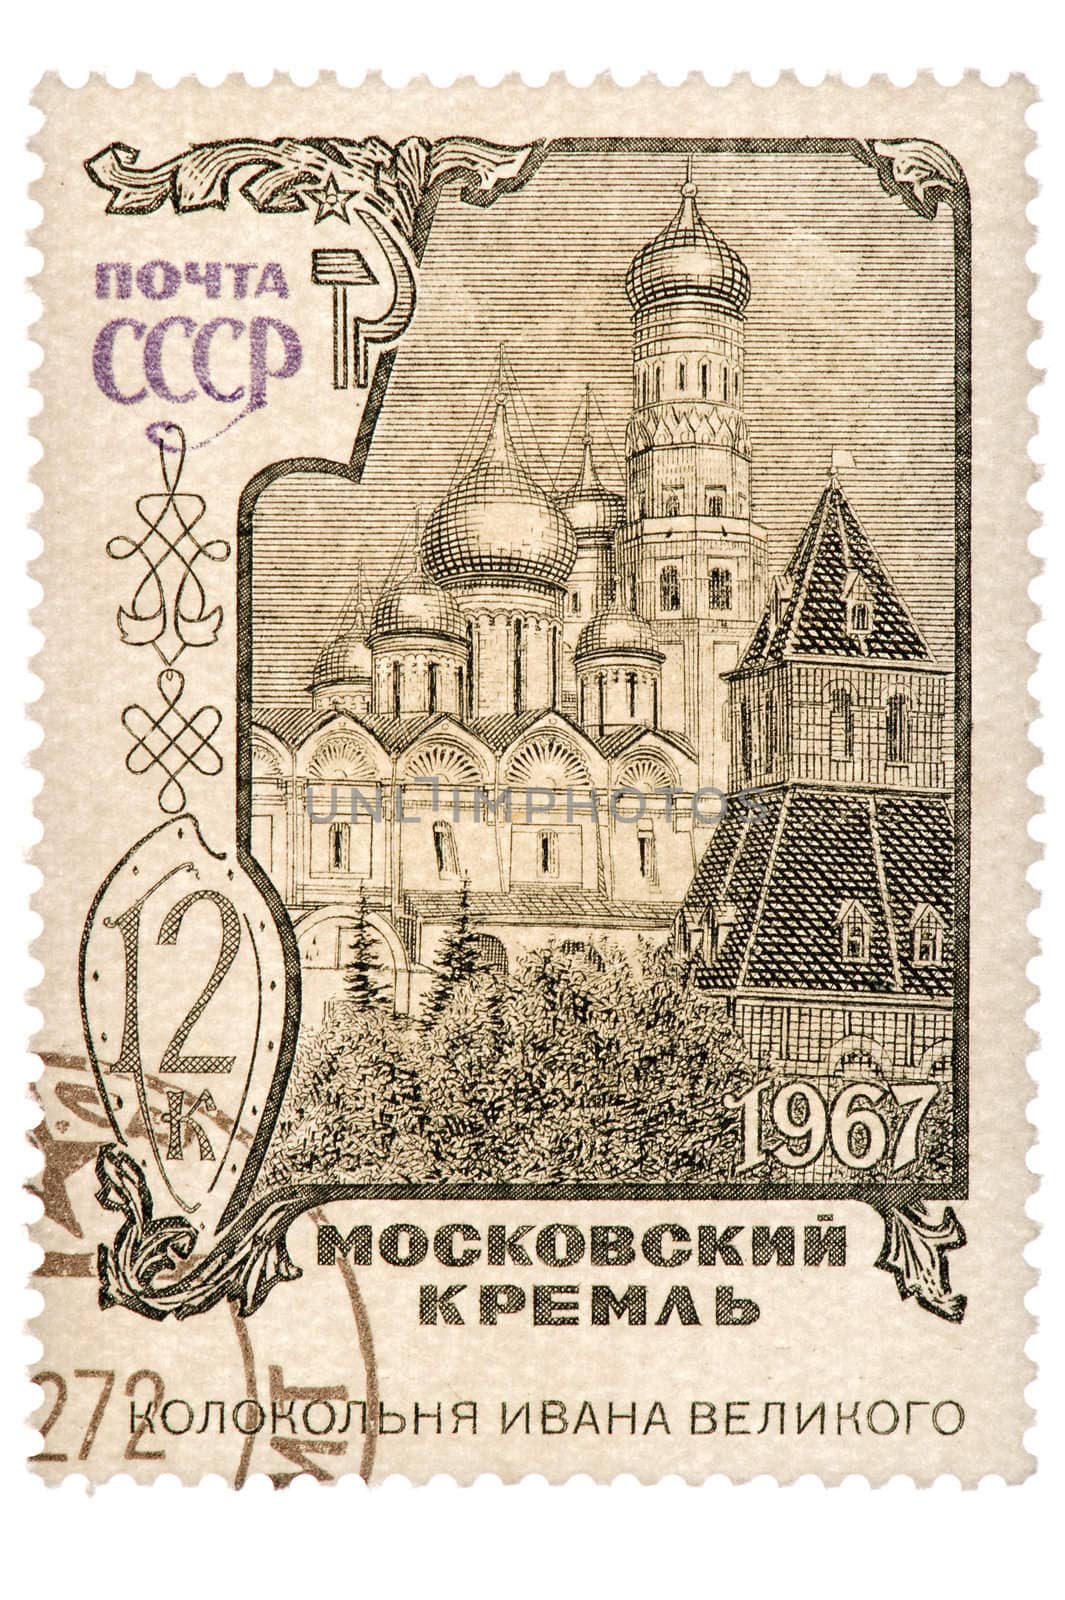 object on white - Moscow Kremlin postage stamp